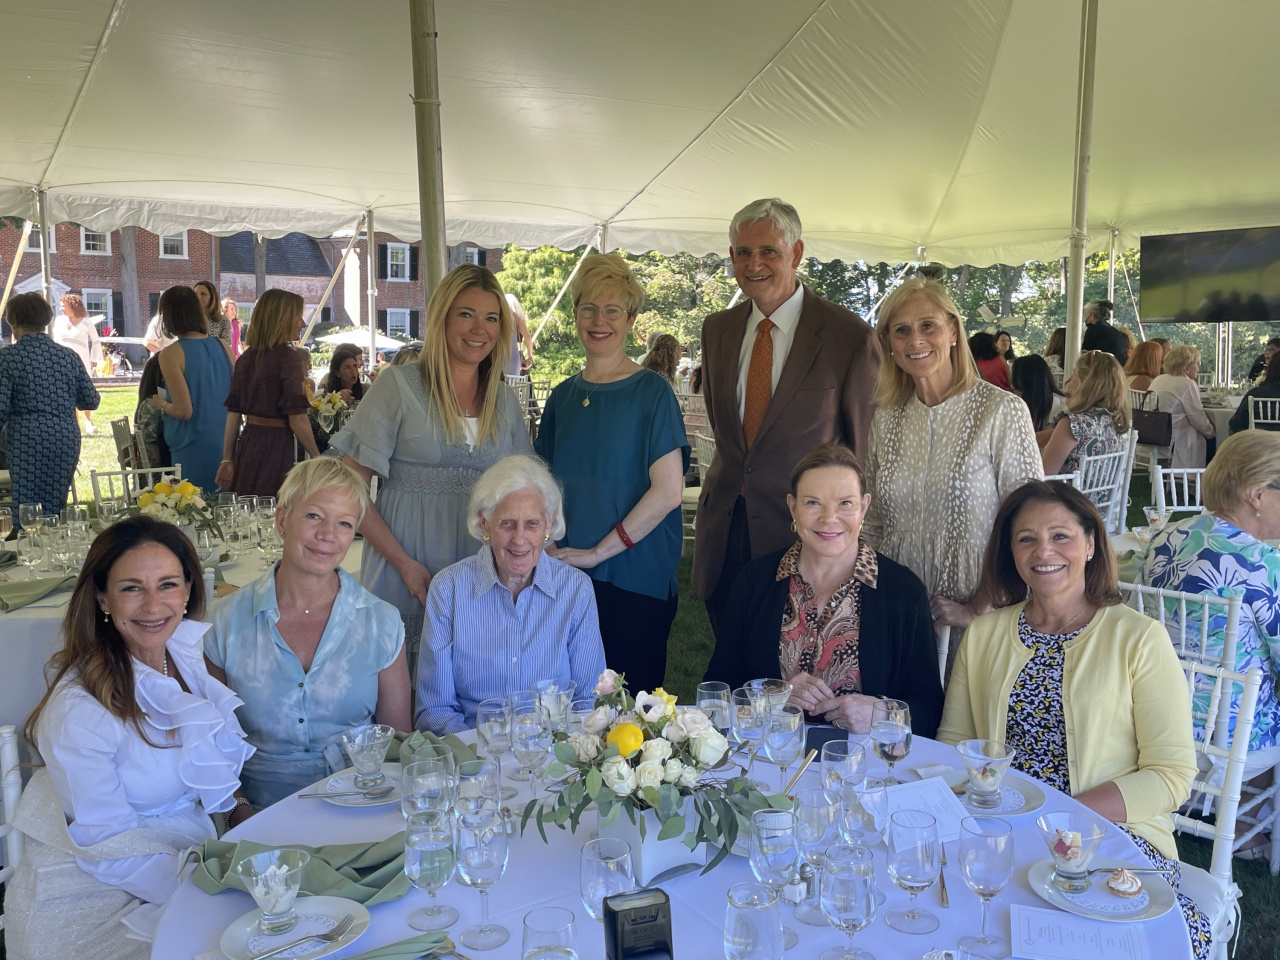 A team of supporters from Daniel Gale Sotheby’s International Realty recently attended Cold Spring Harbor Laboratory’s (CSHL) 20th annual Women’s Partnership for Science lecture and luncheon supporting the work of women scientists at the Laboratory.  Pictured here from Daniel Gale Sotheby’s International Realty: Front row, (l-r)  Laura Zambratto, Christine Petersen, Margy Hargraves, Patricia Petersen, Lisa Sicurelli.  Back row (l-r)  Jacqueline Clancy,  Jessica Tollkuhn, guest speaker and Associate Professor,  CSHL; Bruce Stillman, president, CSHL; and Ellen Hanes.